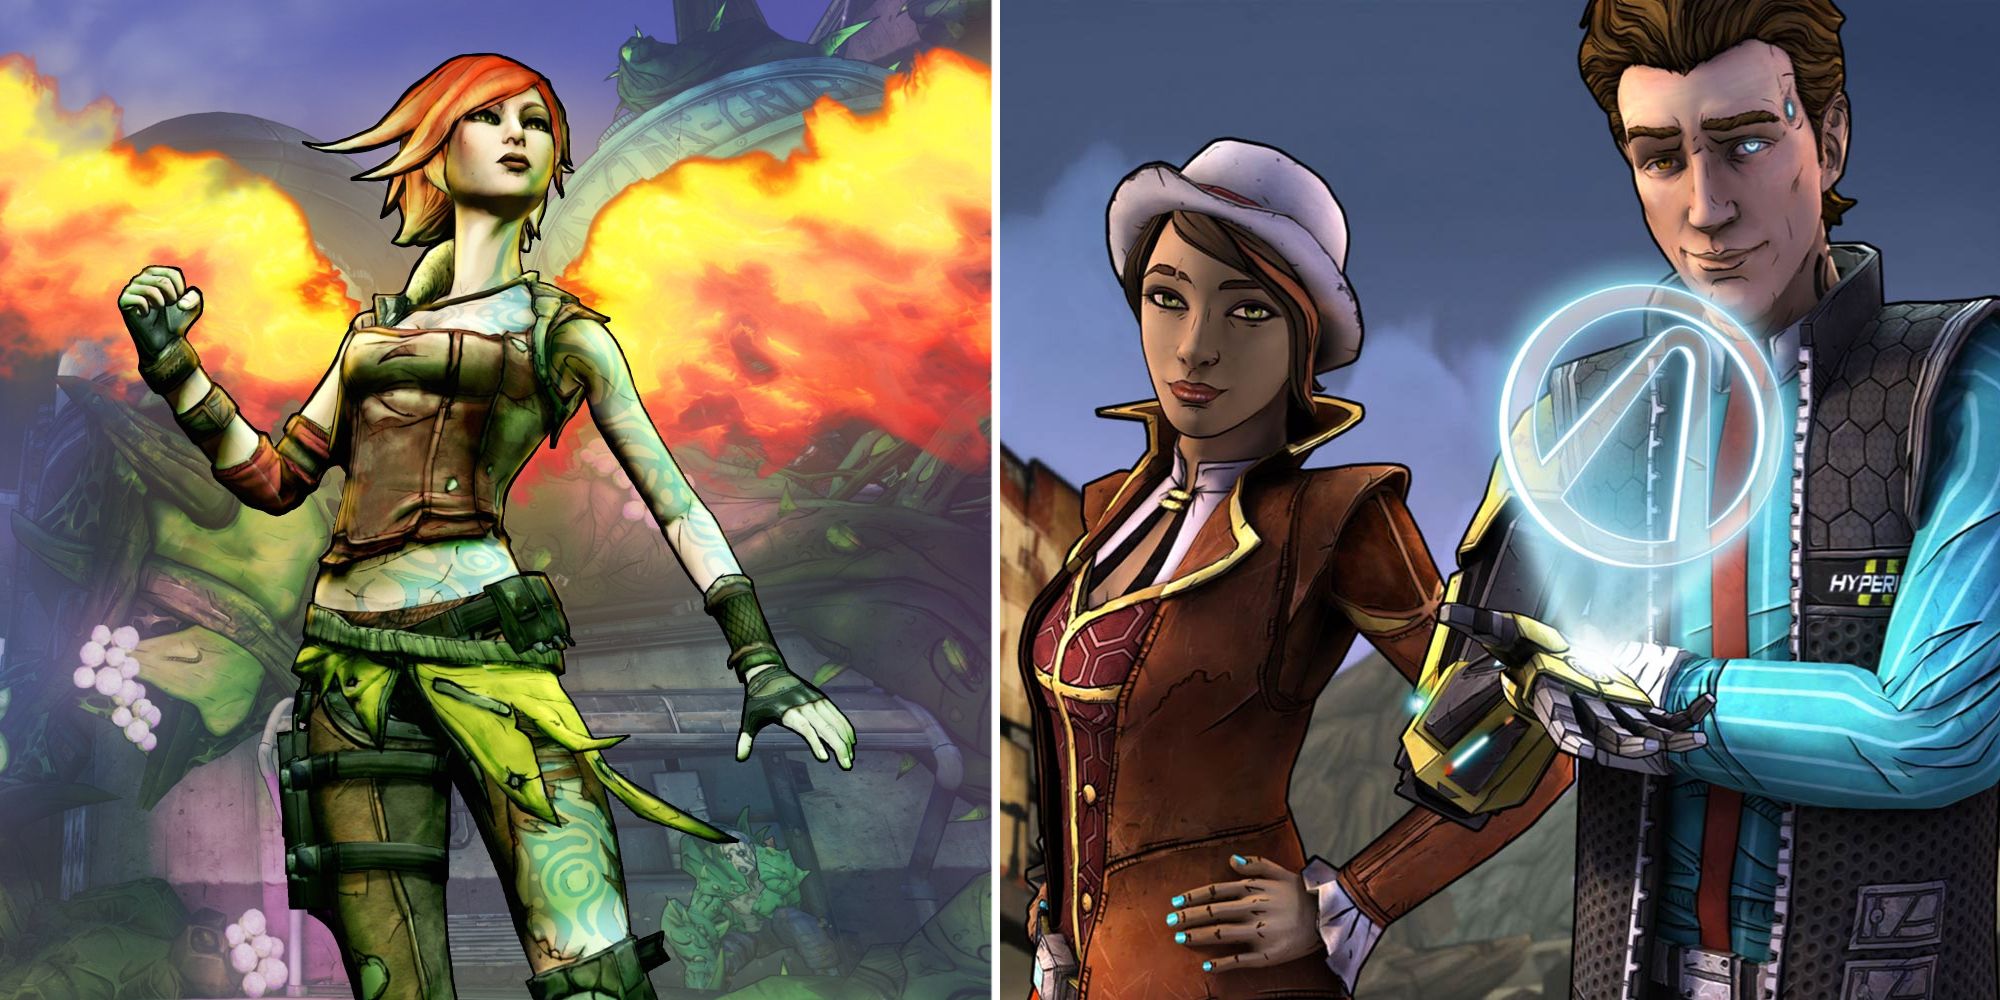 Lilith from Borderlands 2 and Fiona and Rhys from Tales from the Borderlands